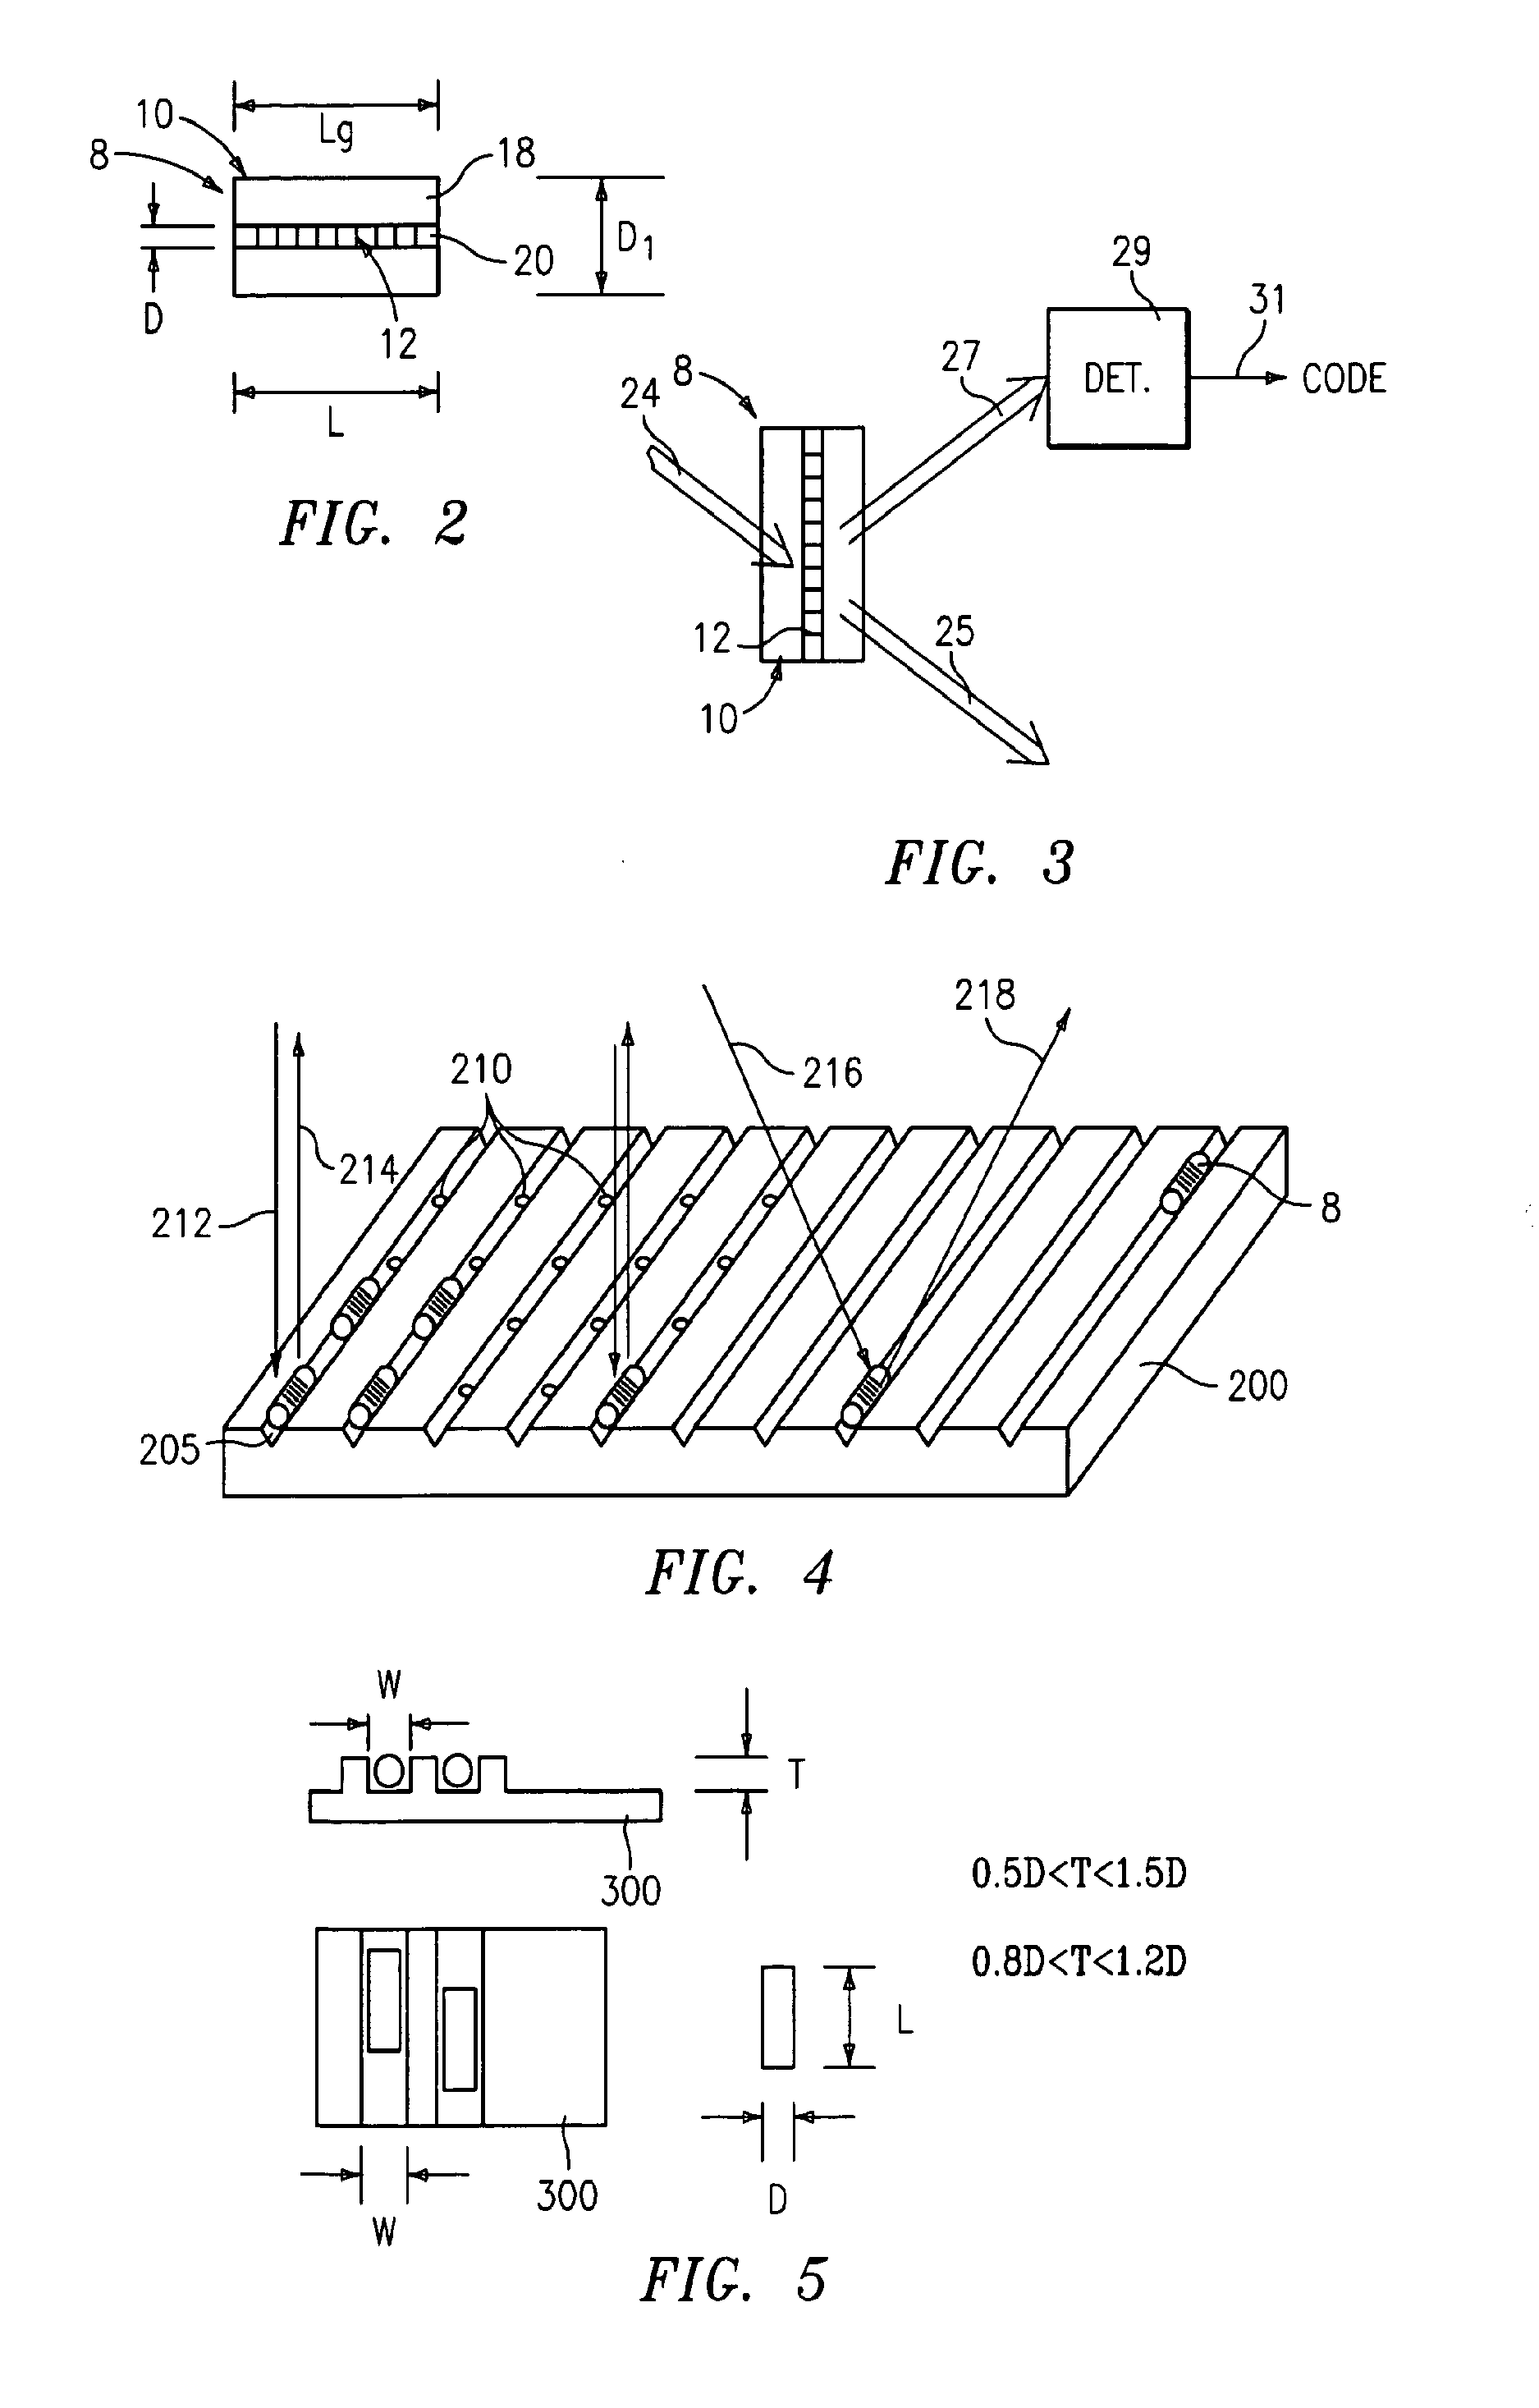 Method and apparatus for aligning microbeads in order to interrogate the same